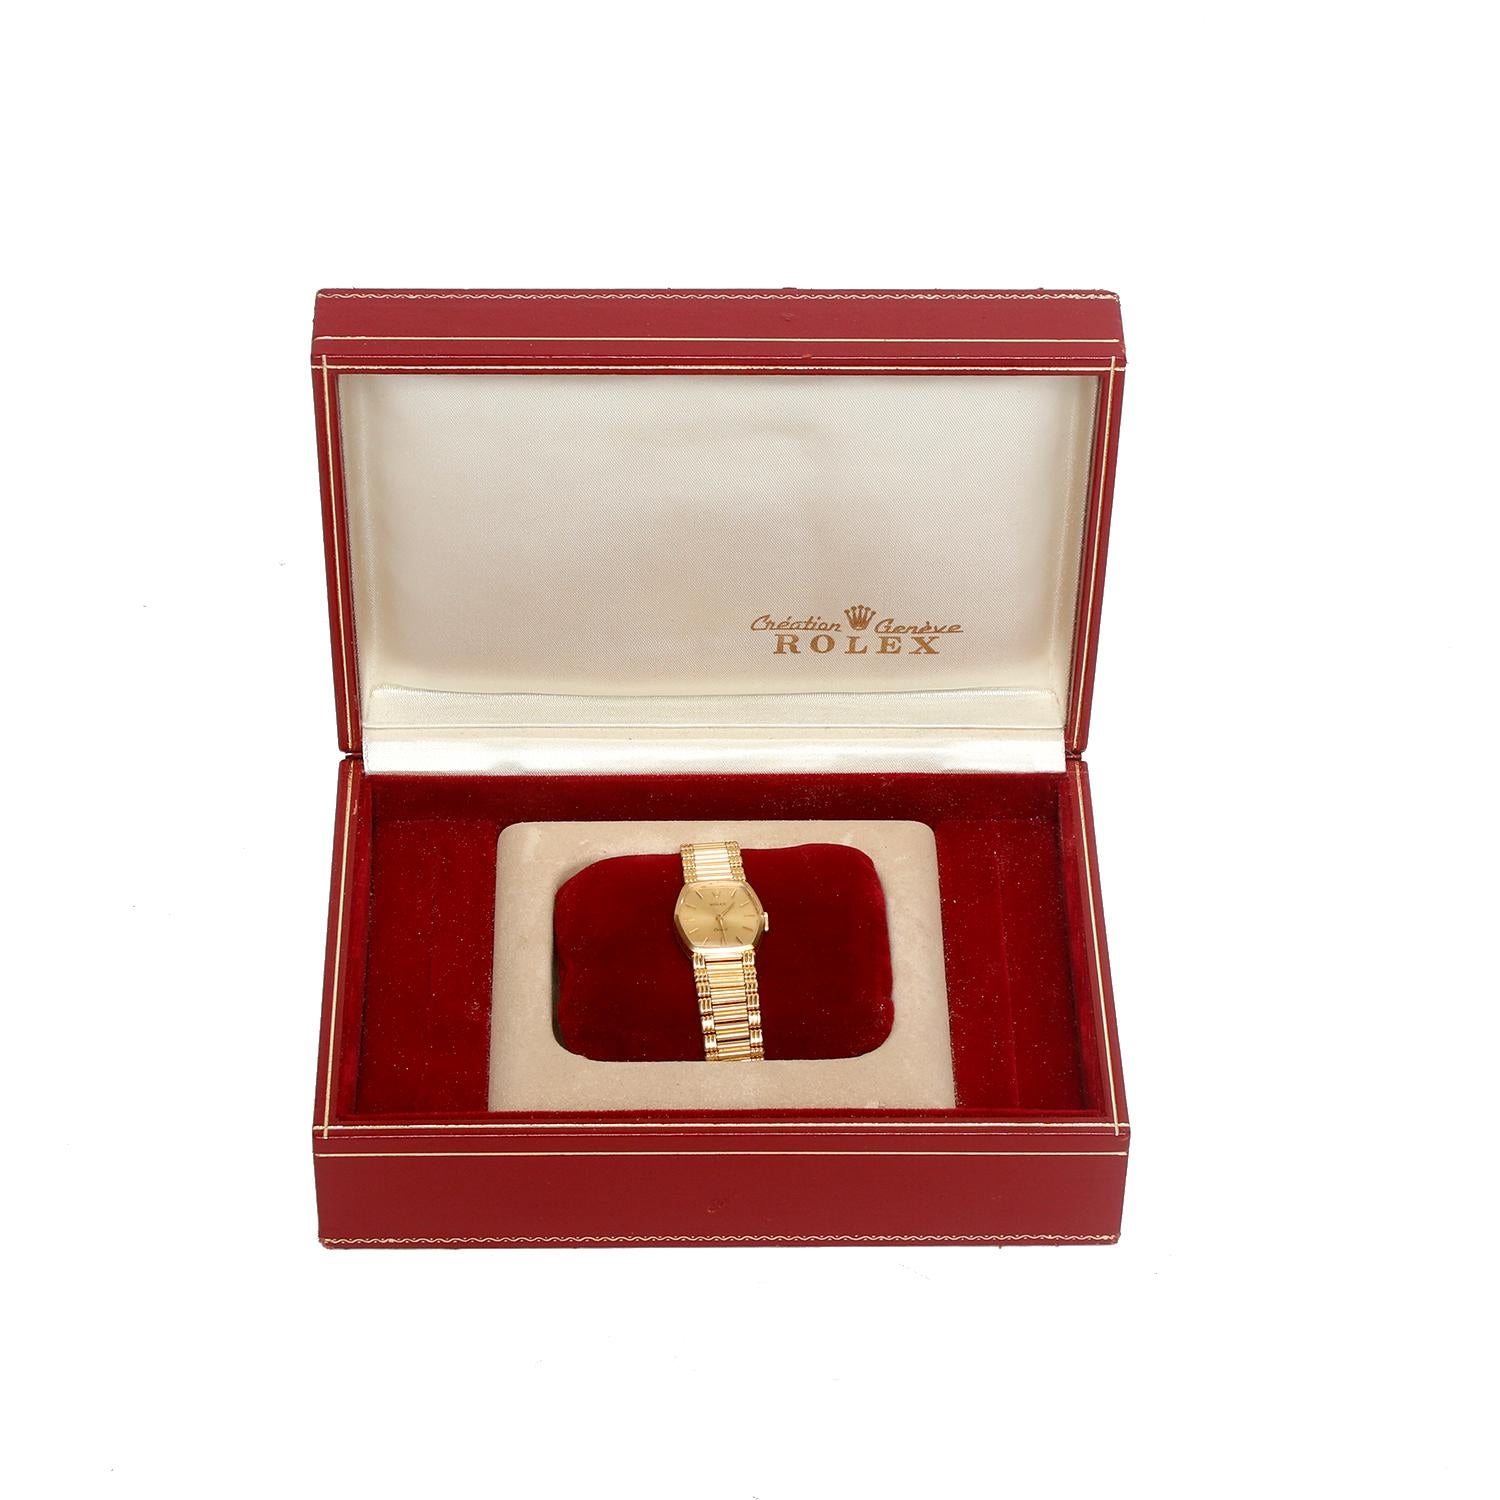 Rolex Cellini Orchid 18k Yellow Gold Ladies Watch  - Quartz. 18k yellow gold case  (22 x 26 mm diameter). Champagne dial with stick hour markers . 18K Yellow gold link bracelet. Will fit a 7 inch wrist . Pre-owned with Rolex box .